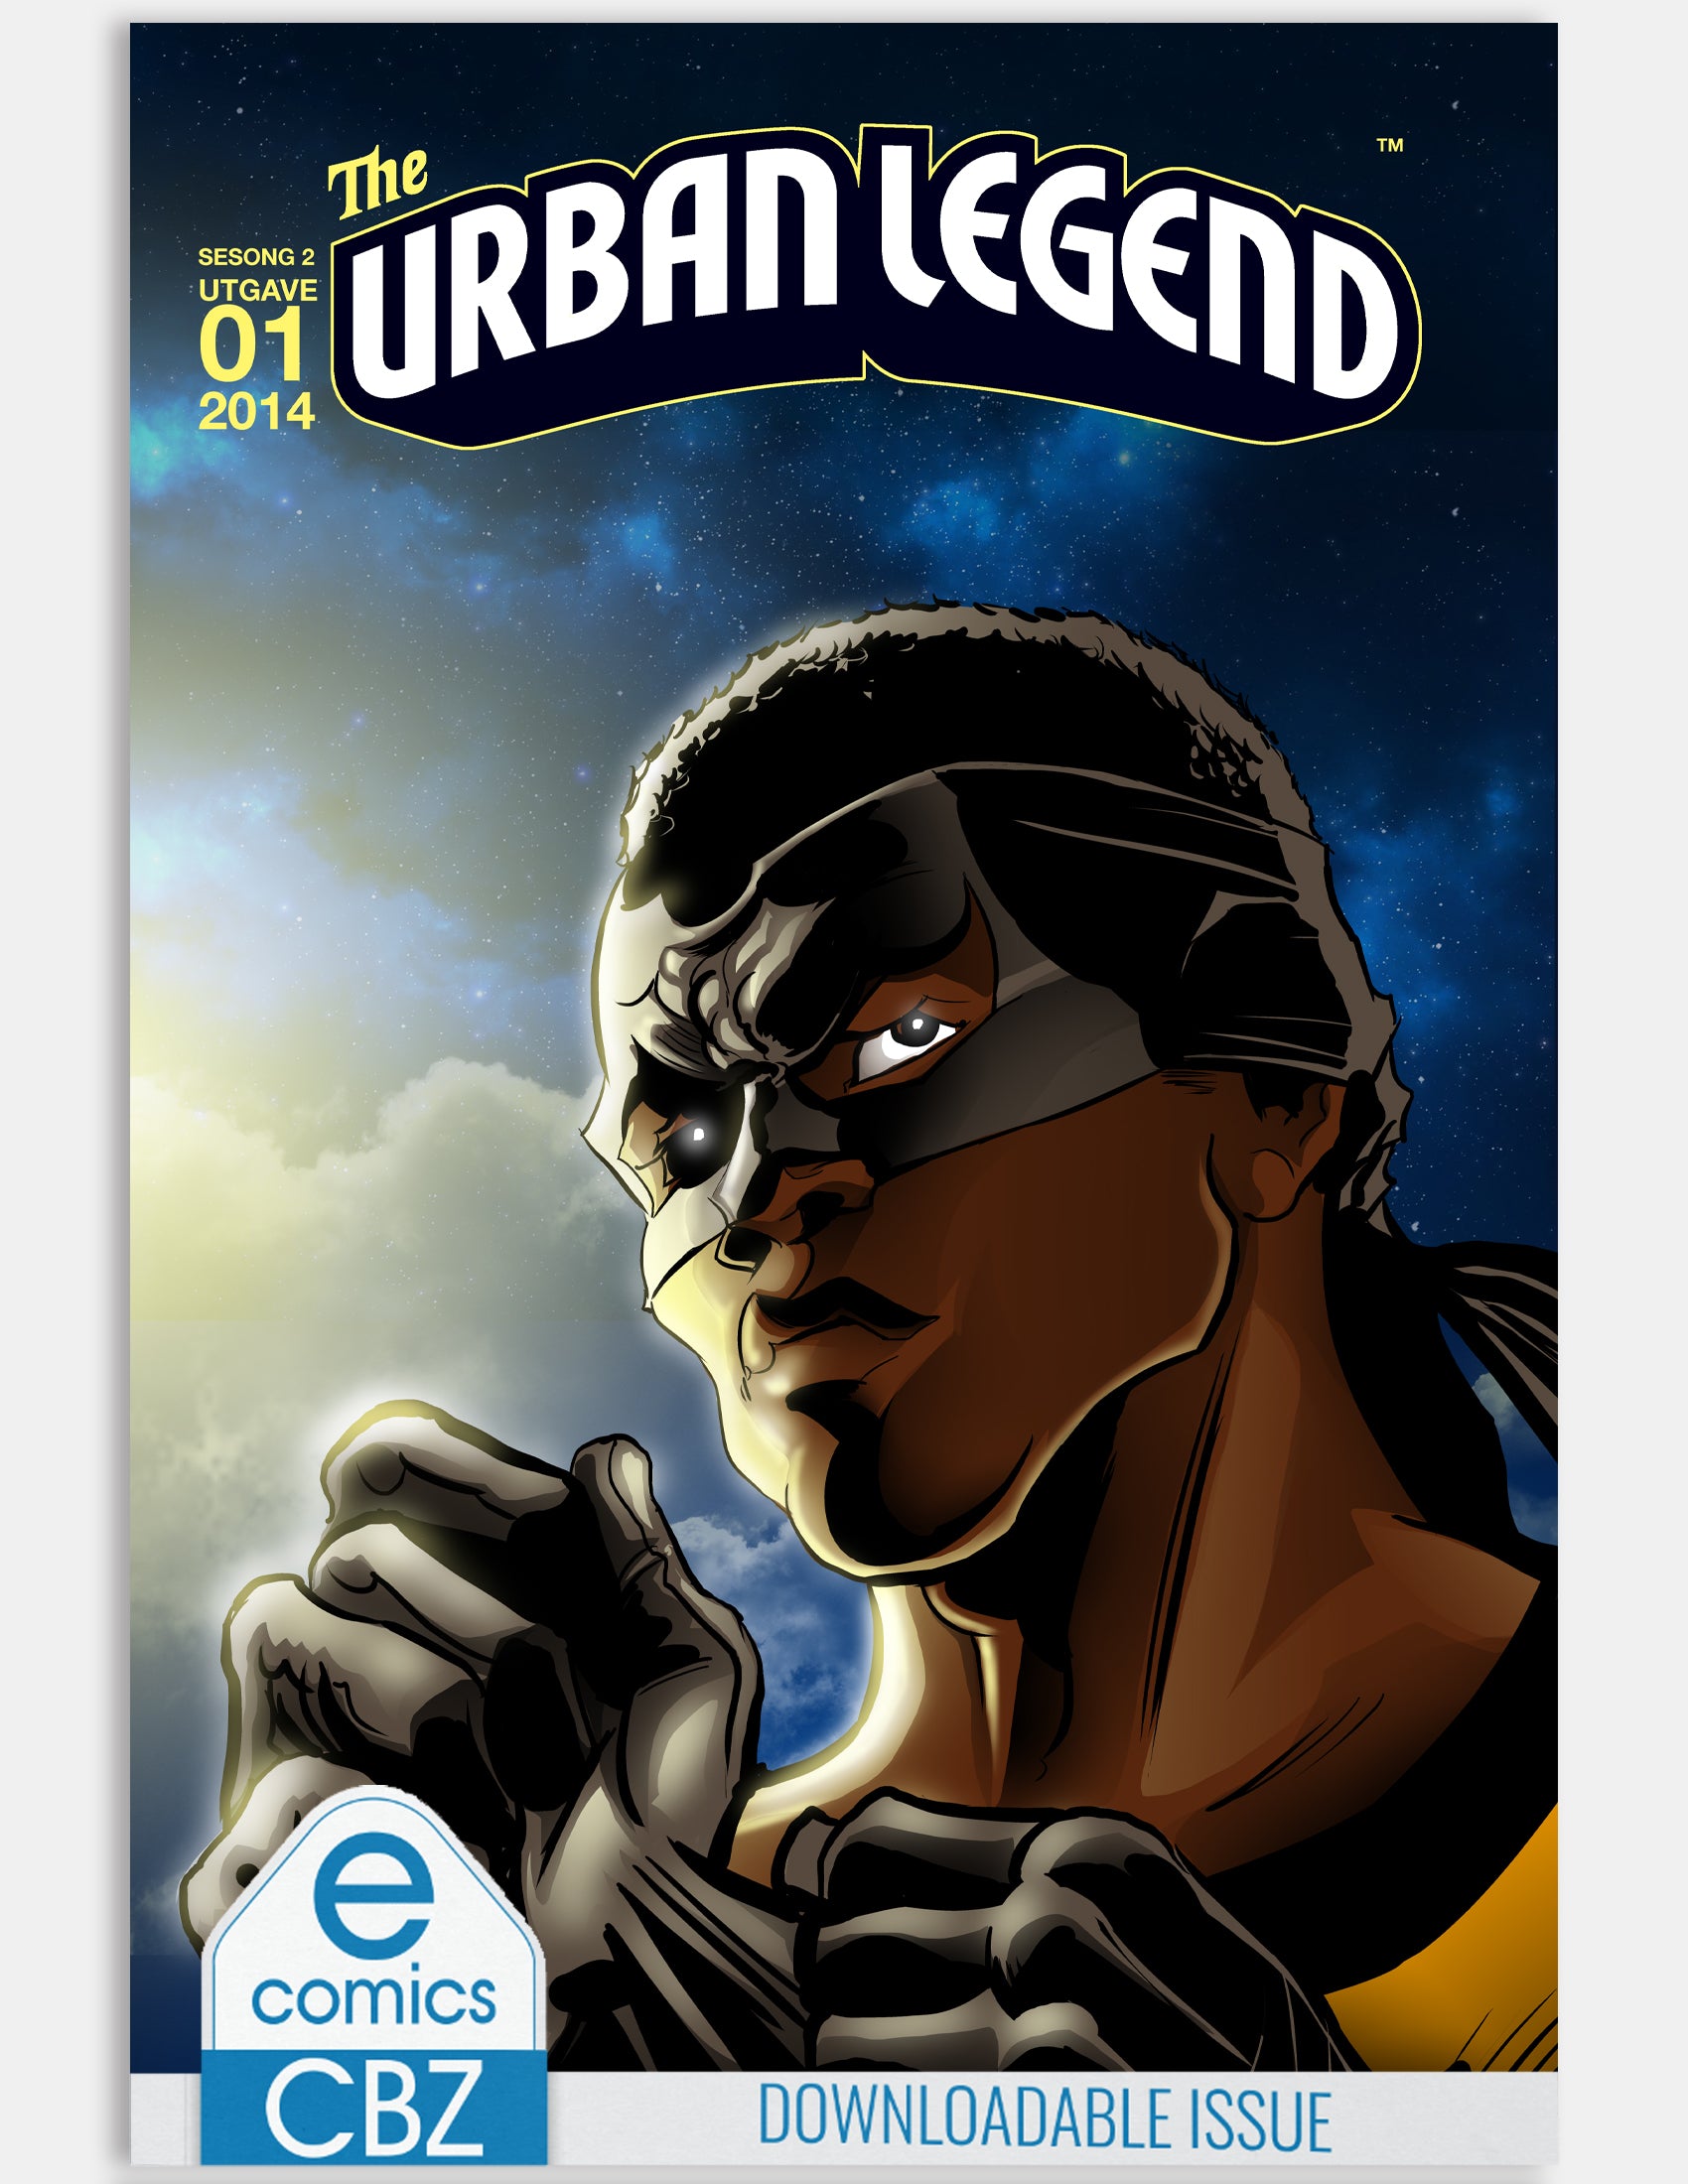 The Urban Legend - Last Dance With The Devil (Issue 1 - Season 2) - Digital Issue